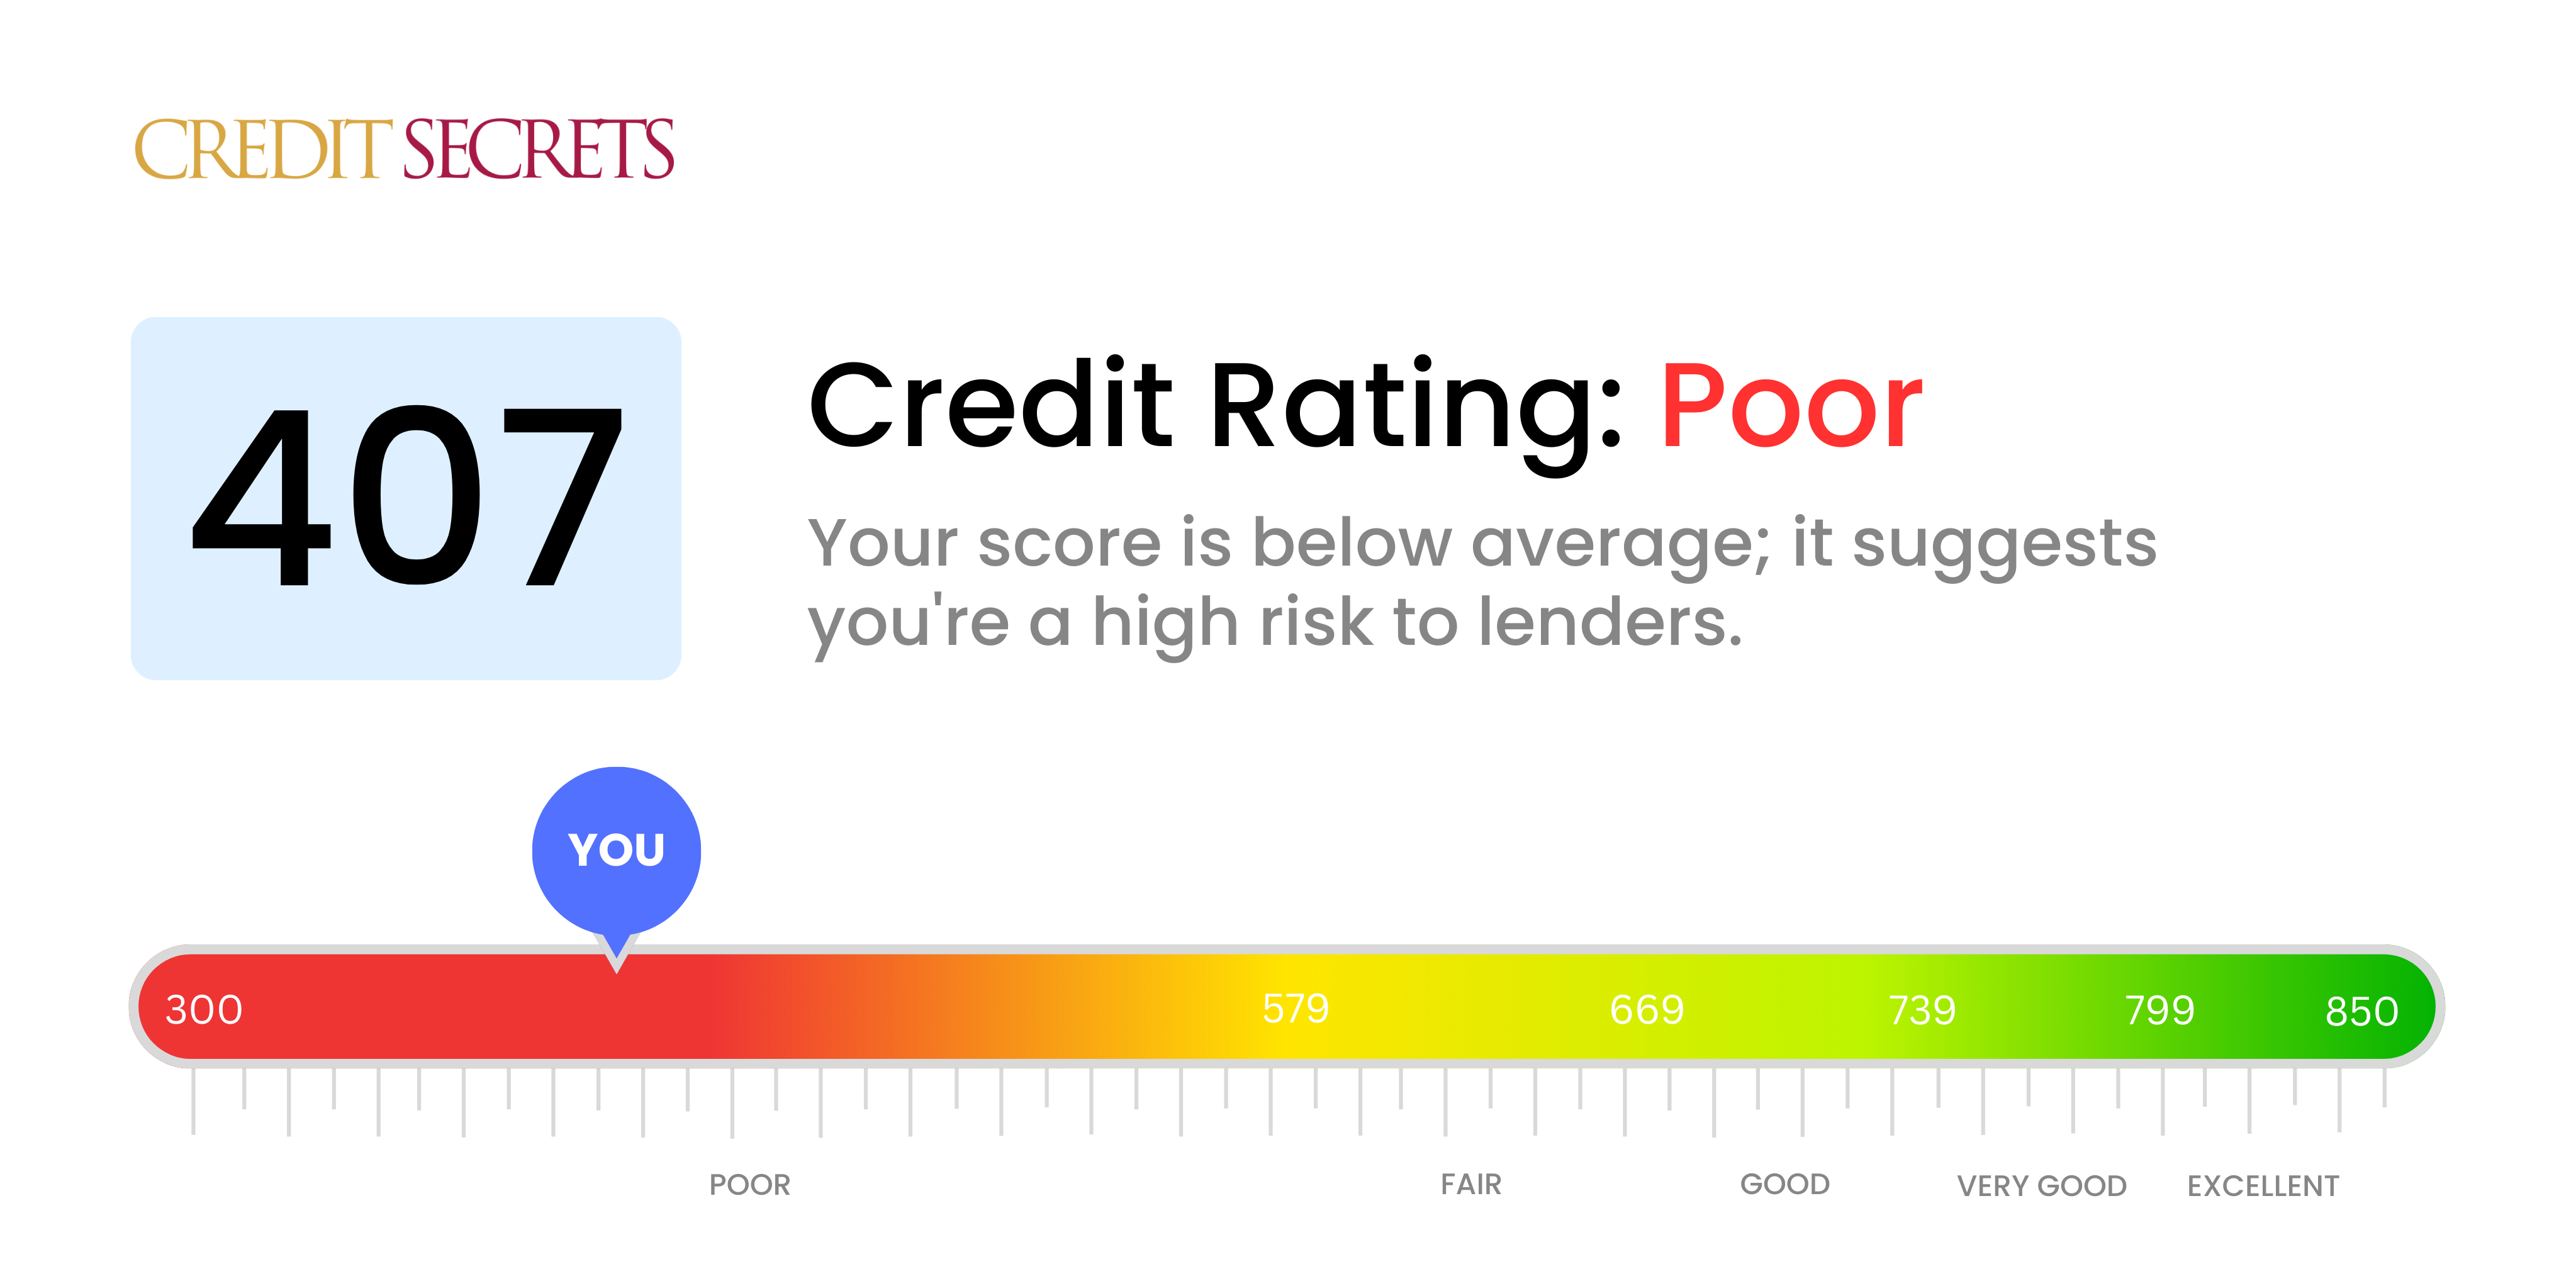 Is 407 a good credit score?